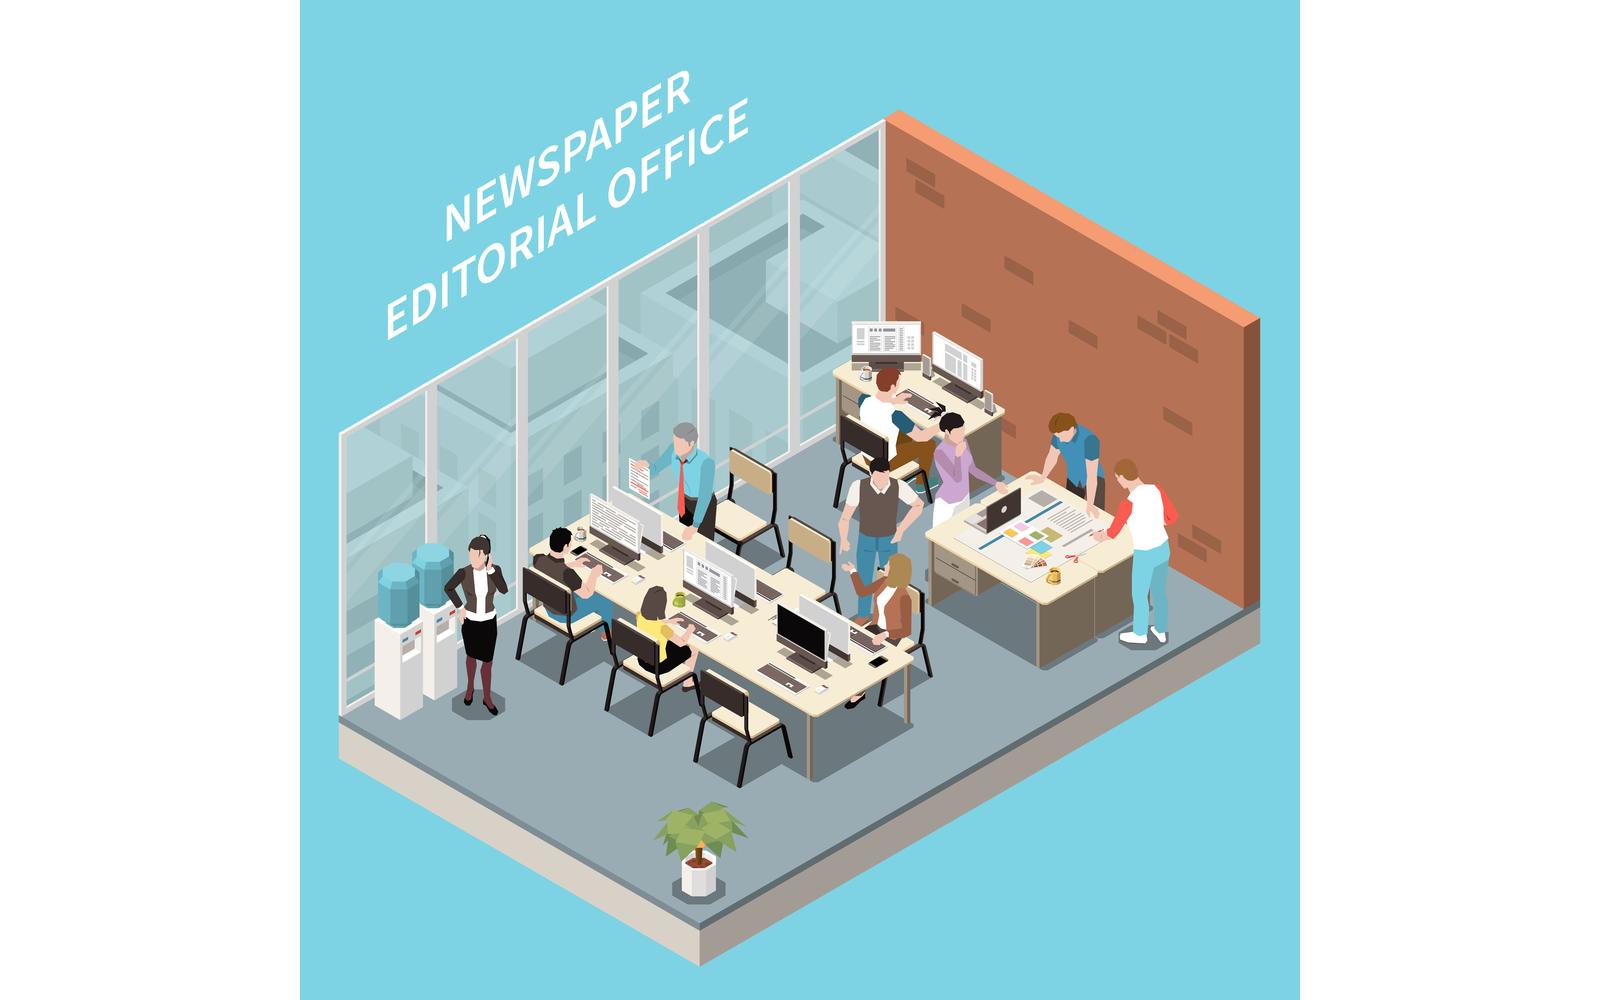 Newspaper Editorial Office Publishing Isometric 210110914 Vector Illustration Concept